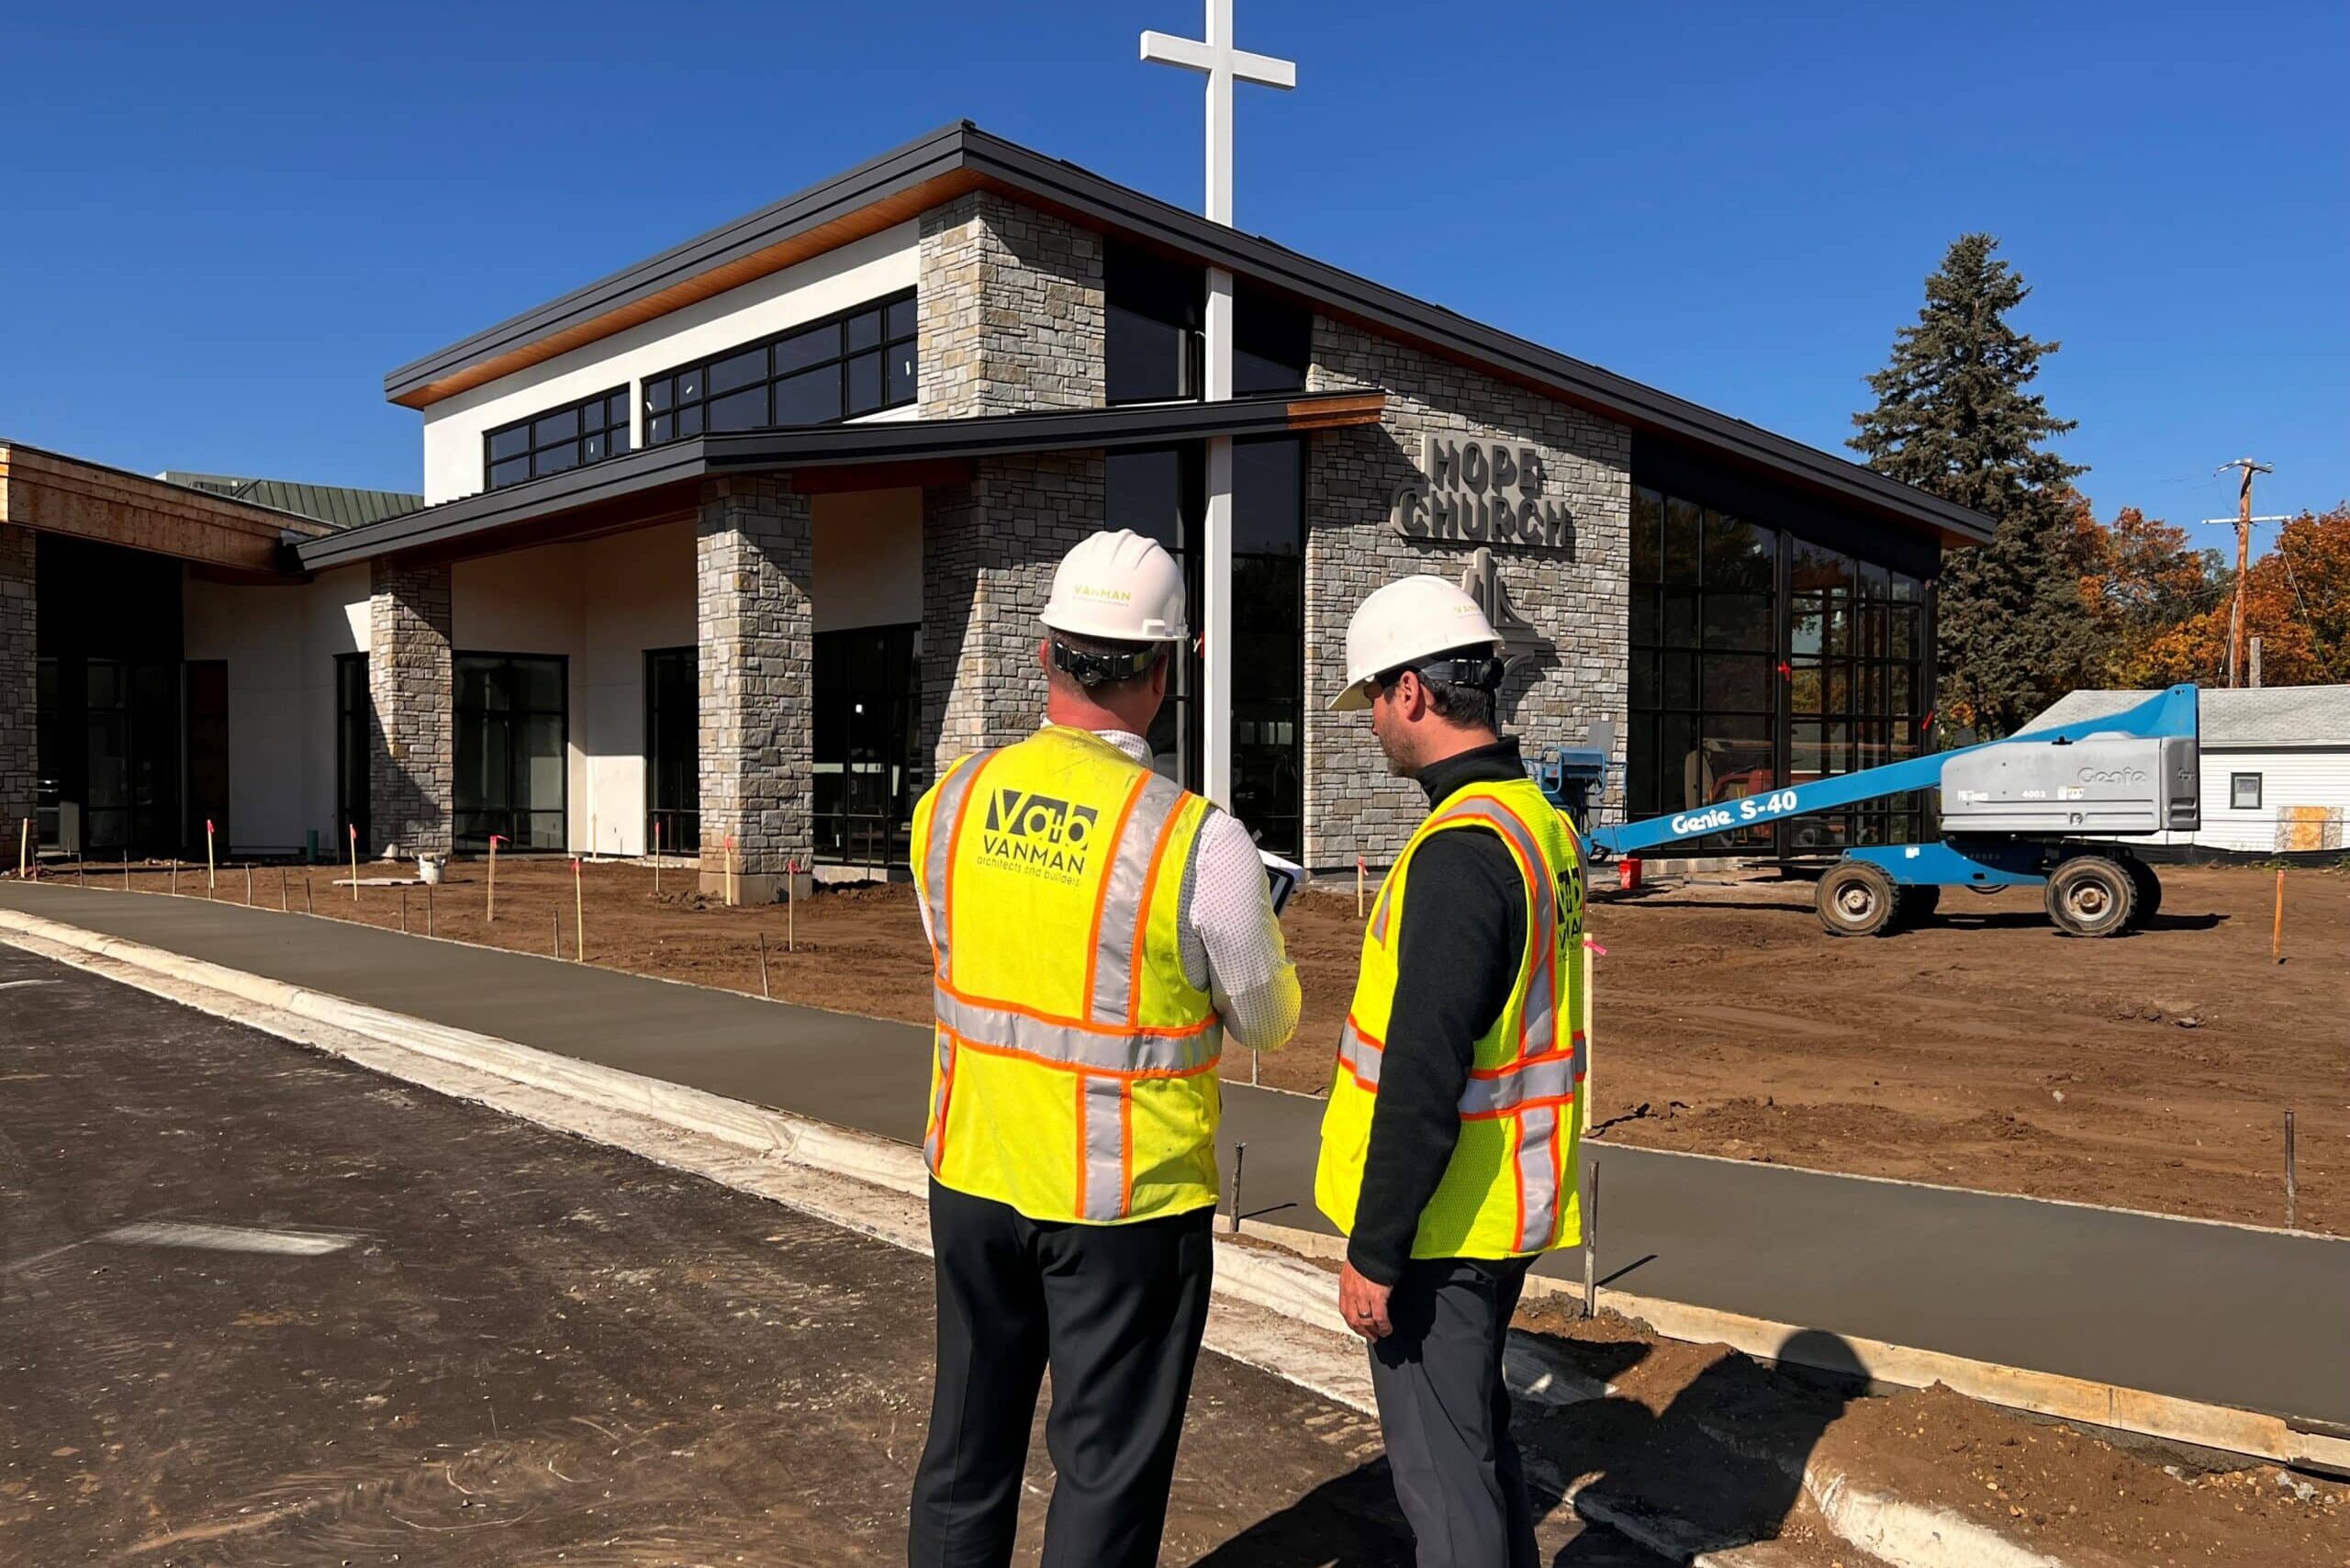 Vanman Architects and Builders | Minnesota's best church builders and architects